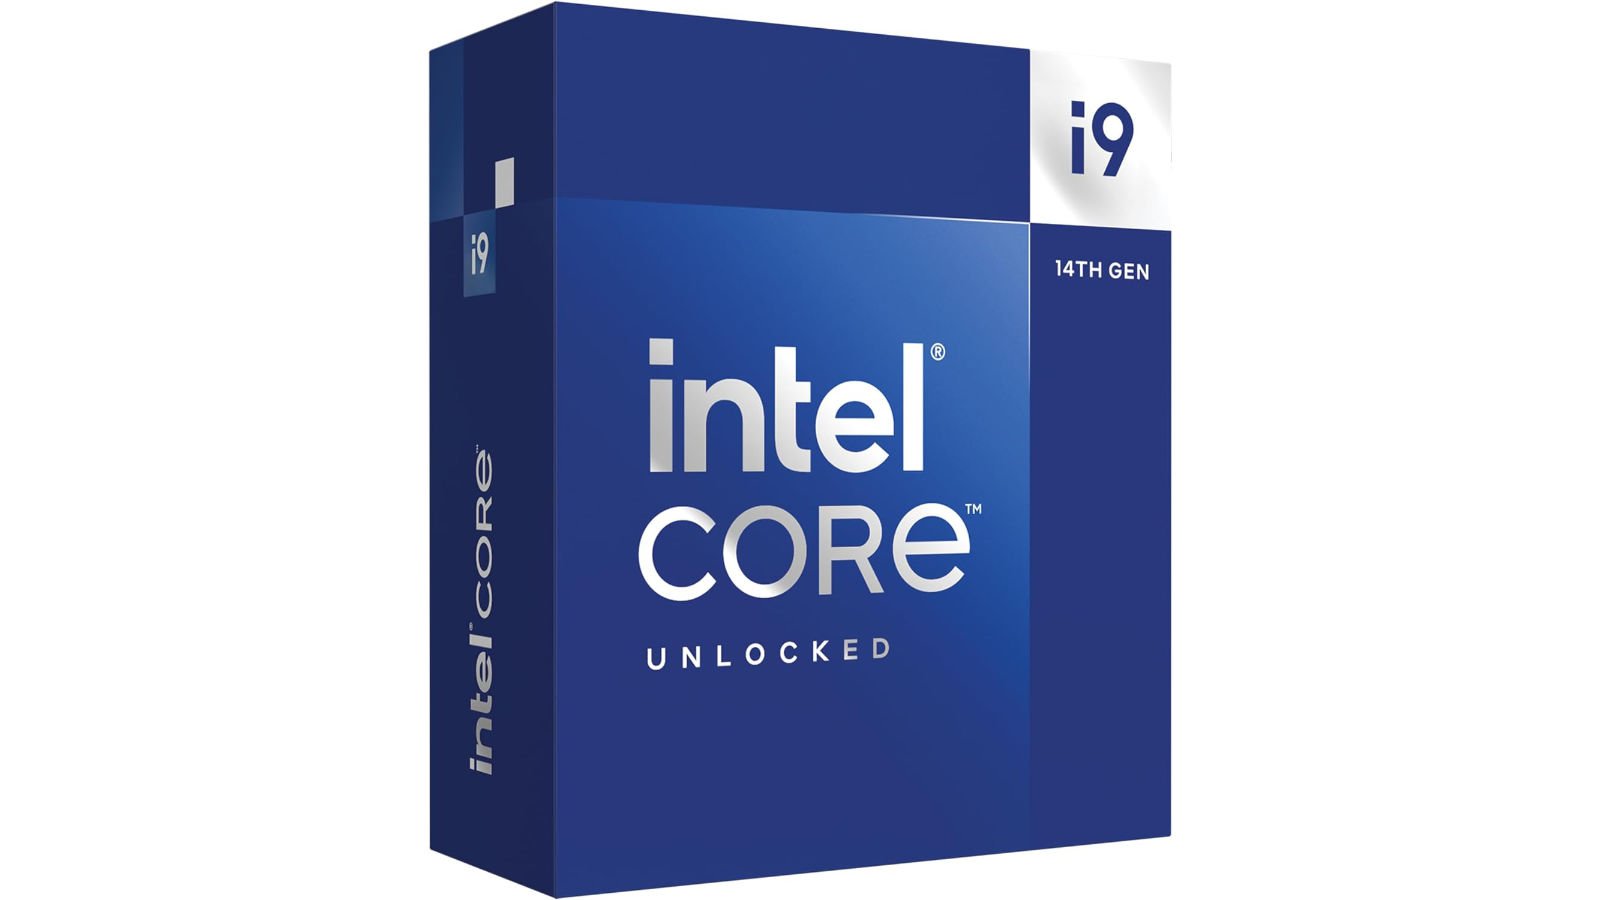 Intel Core i9 14th Gen series retail box against a white background.